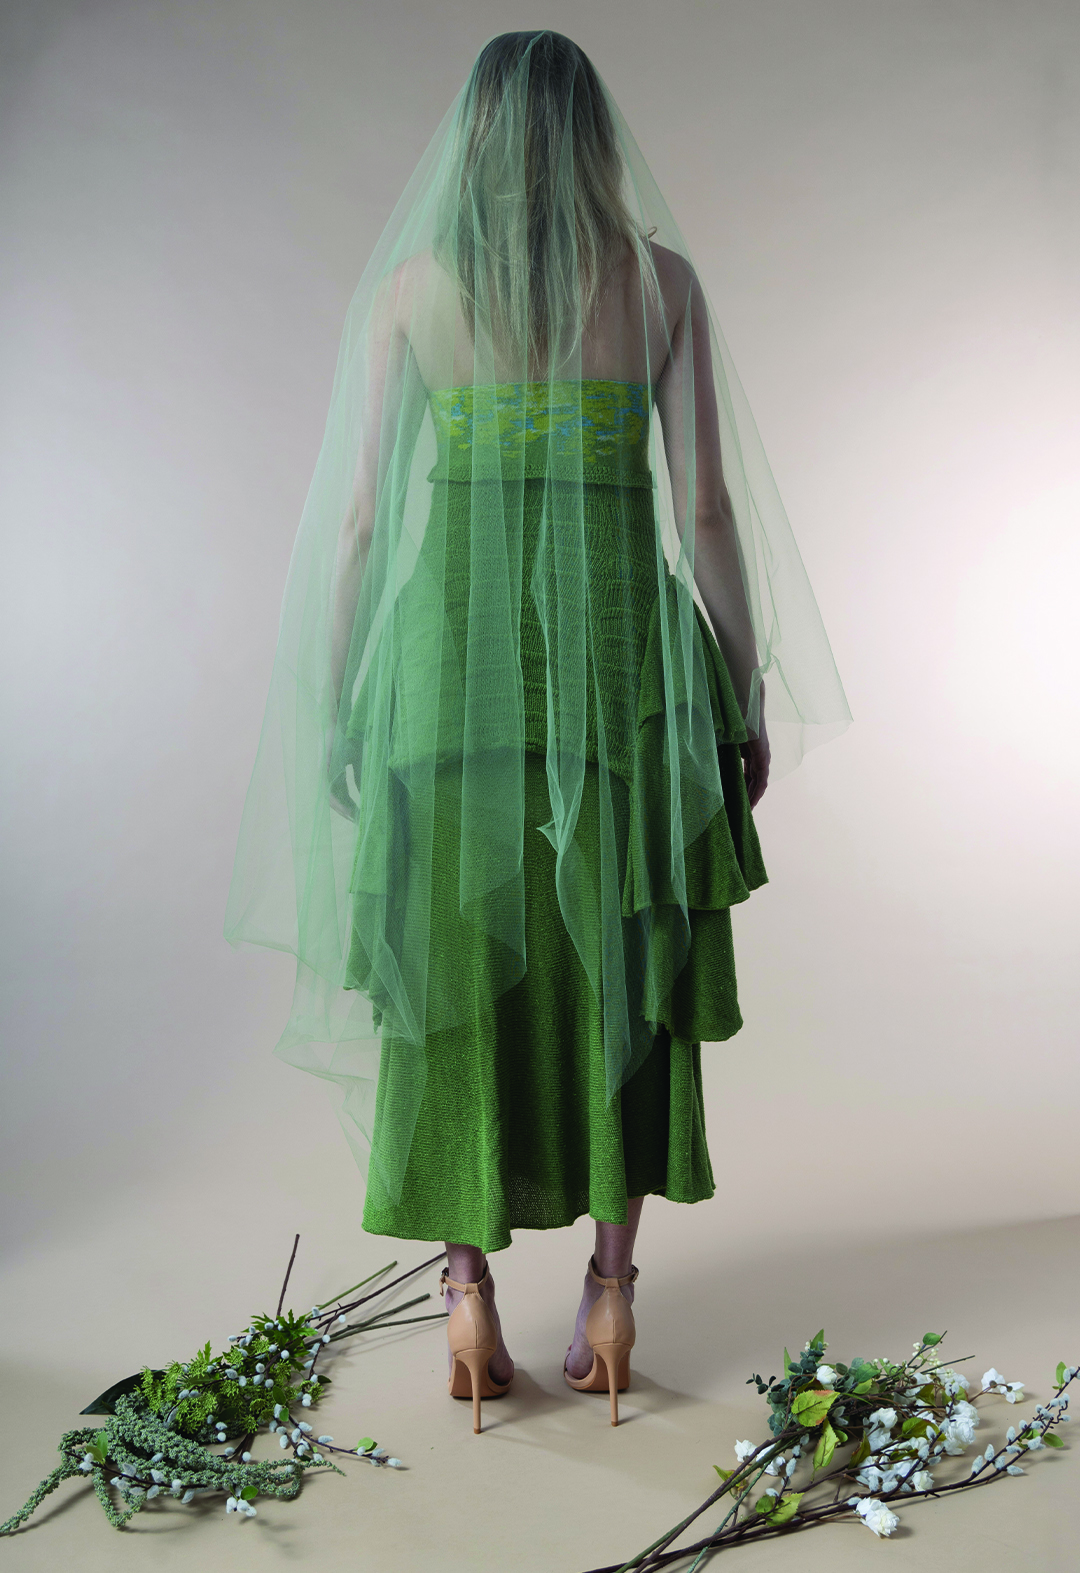 The female model is shown from the back. She is wearing the heather-green knit gown, and a translucent green veil covers her from the top to the knee level. 